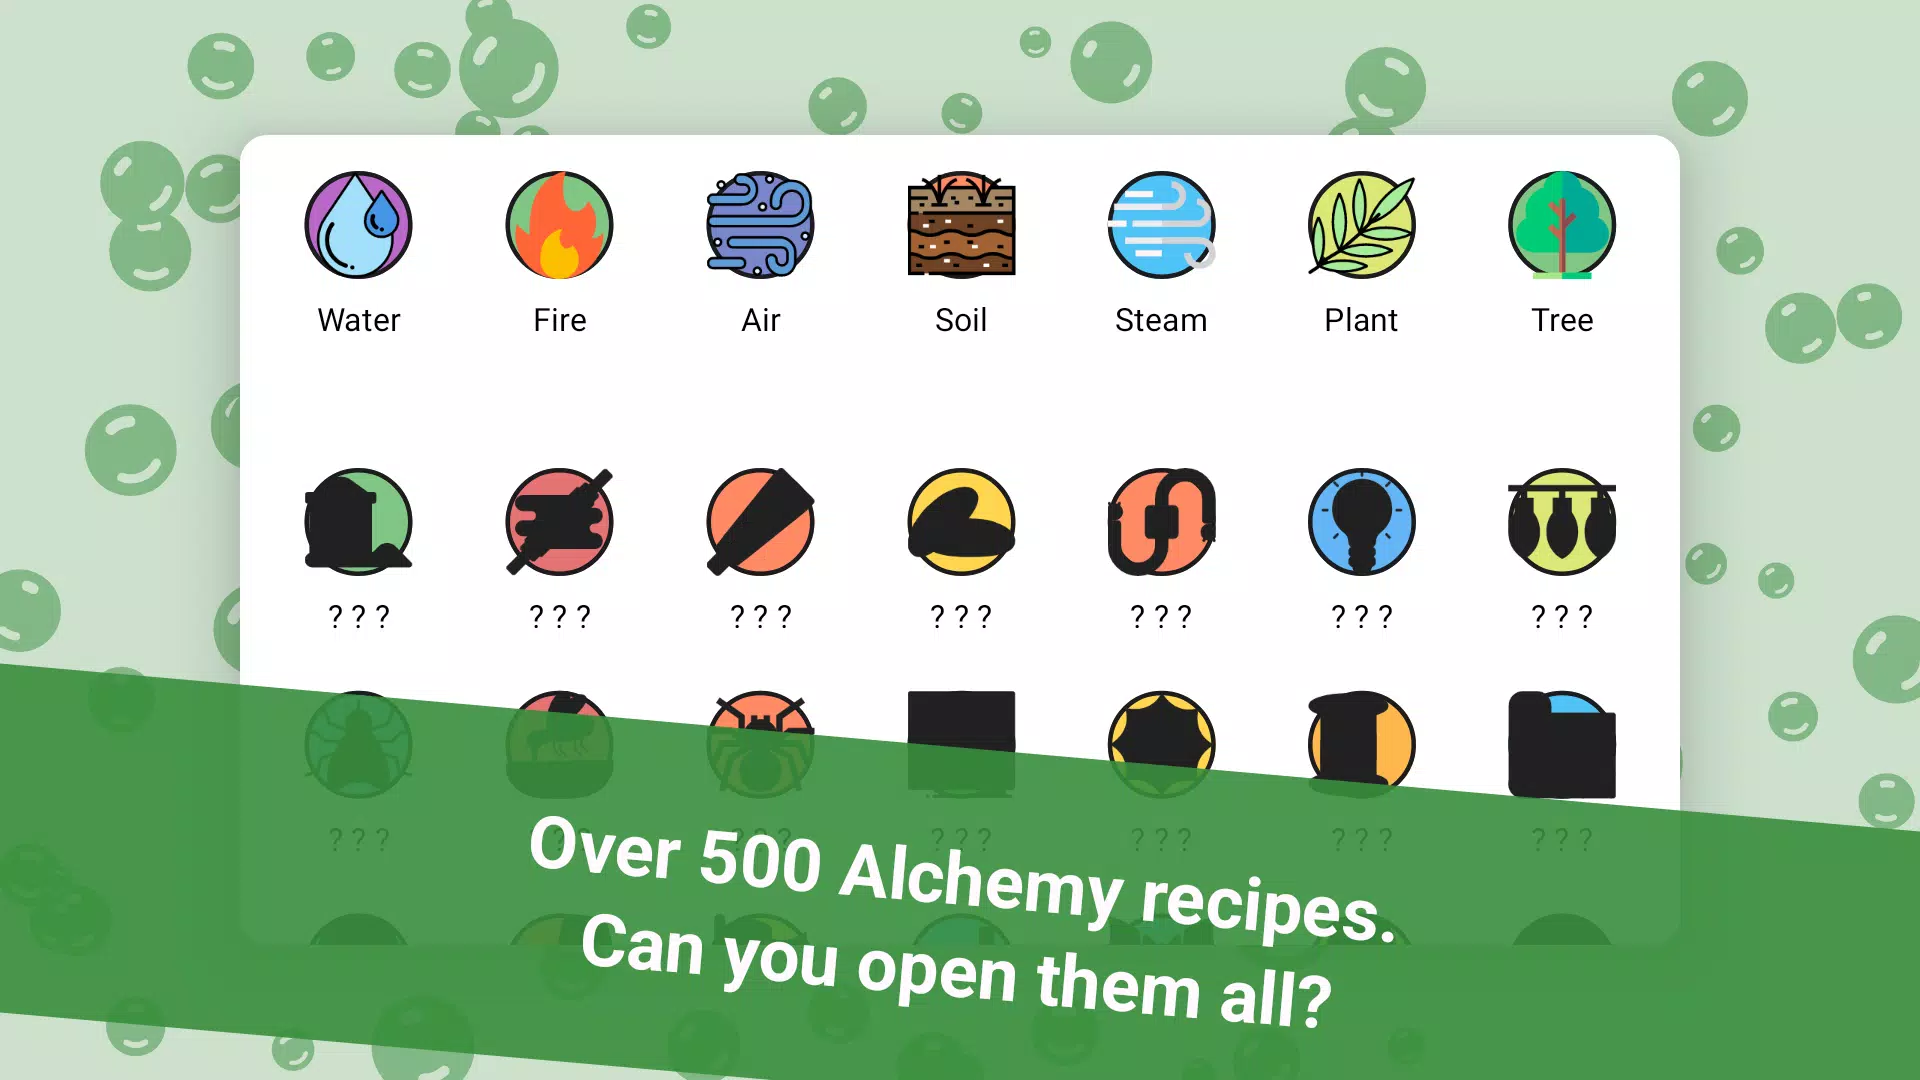 Little Alchemy 3 Doodle APK for Android Download